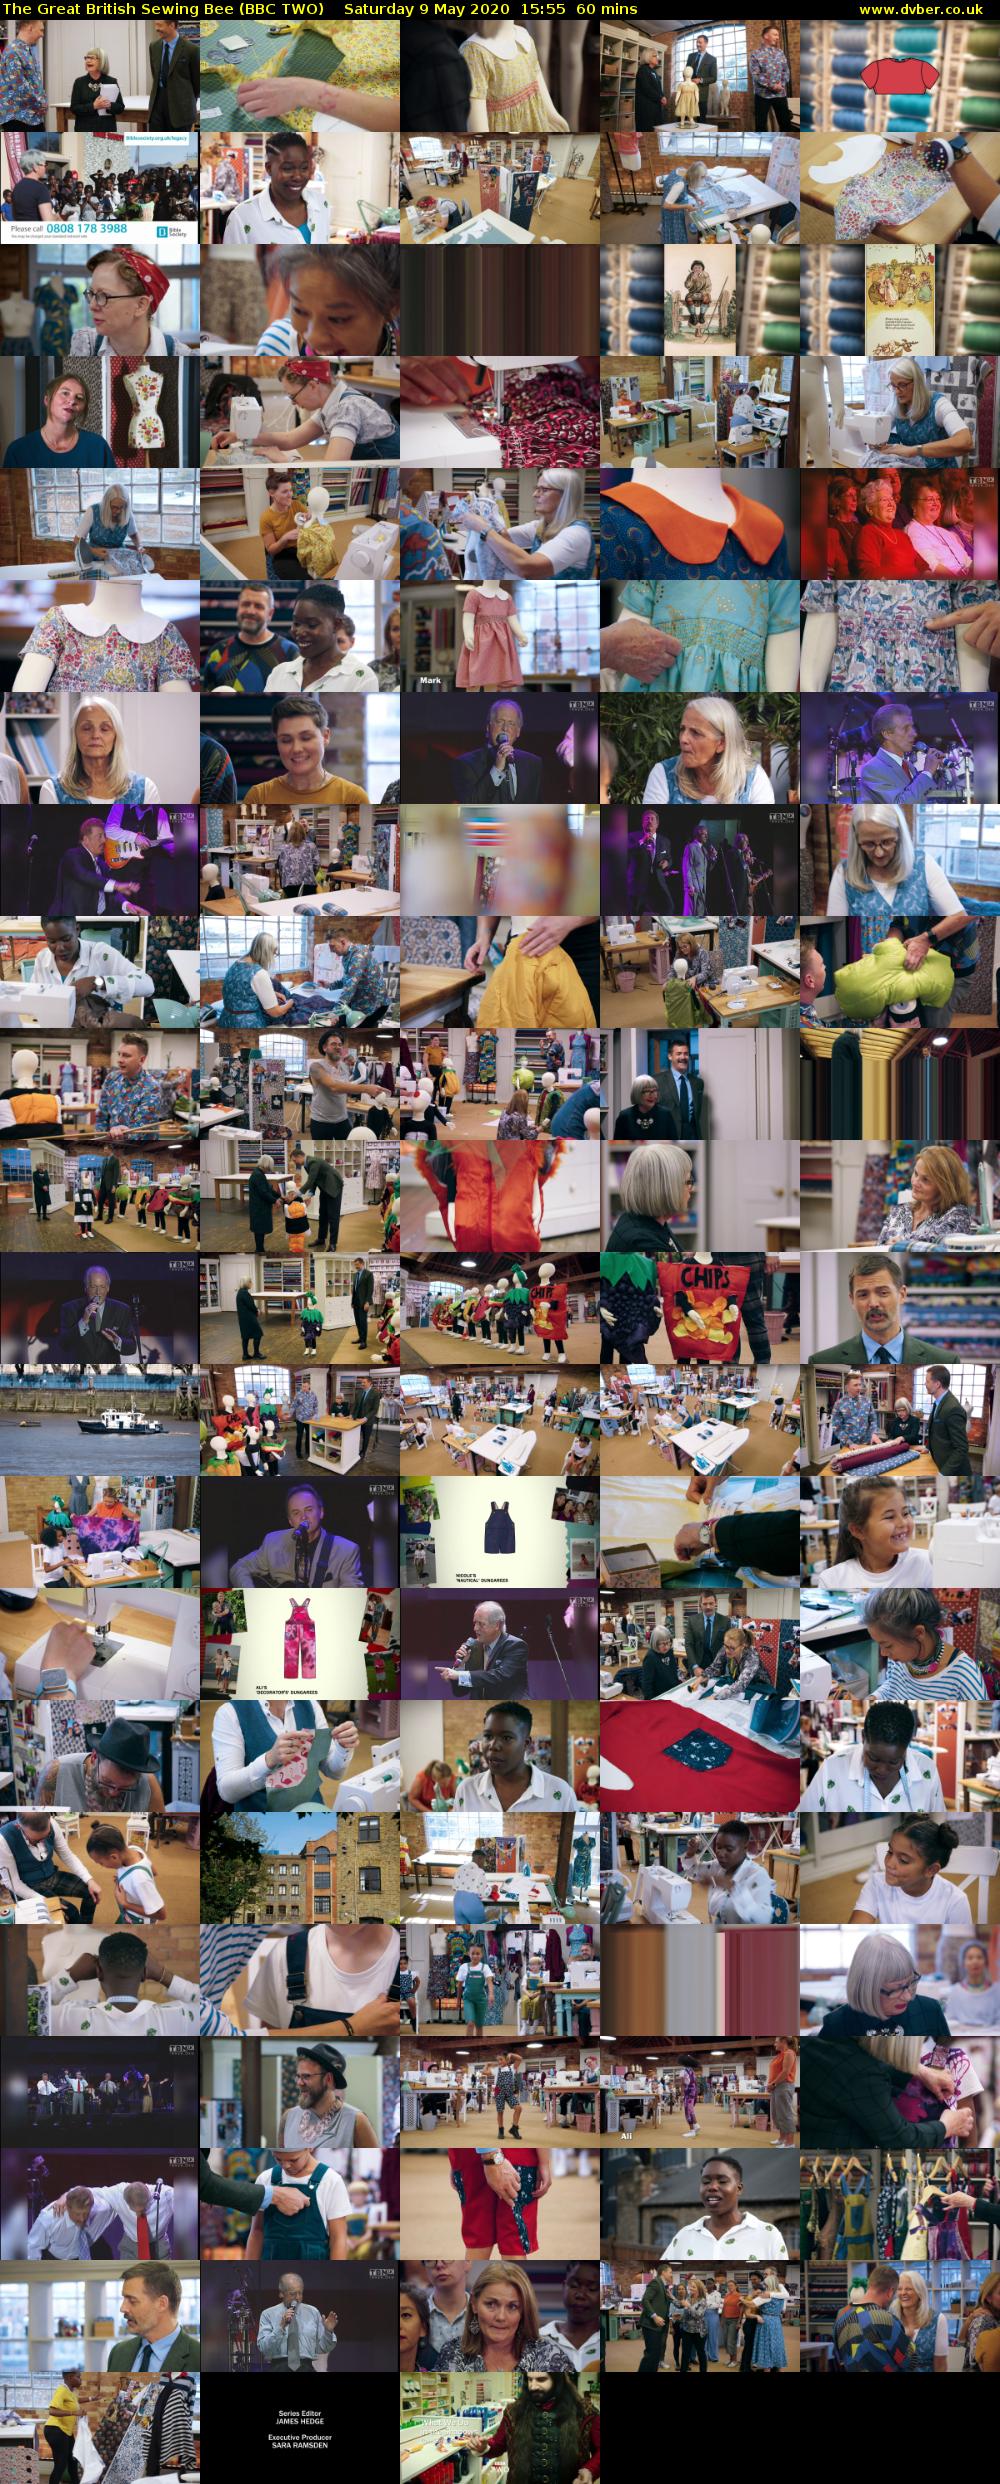 The Great British Sewing Bee (BBC TWO) Saturday 9 May 2020 15:55 - 16:55